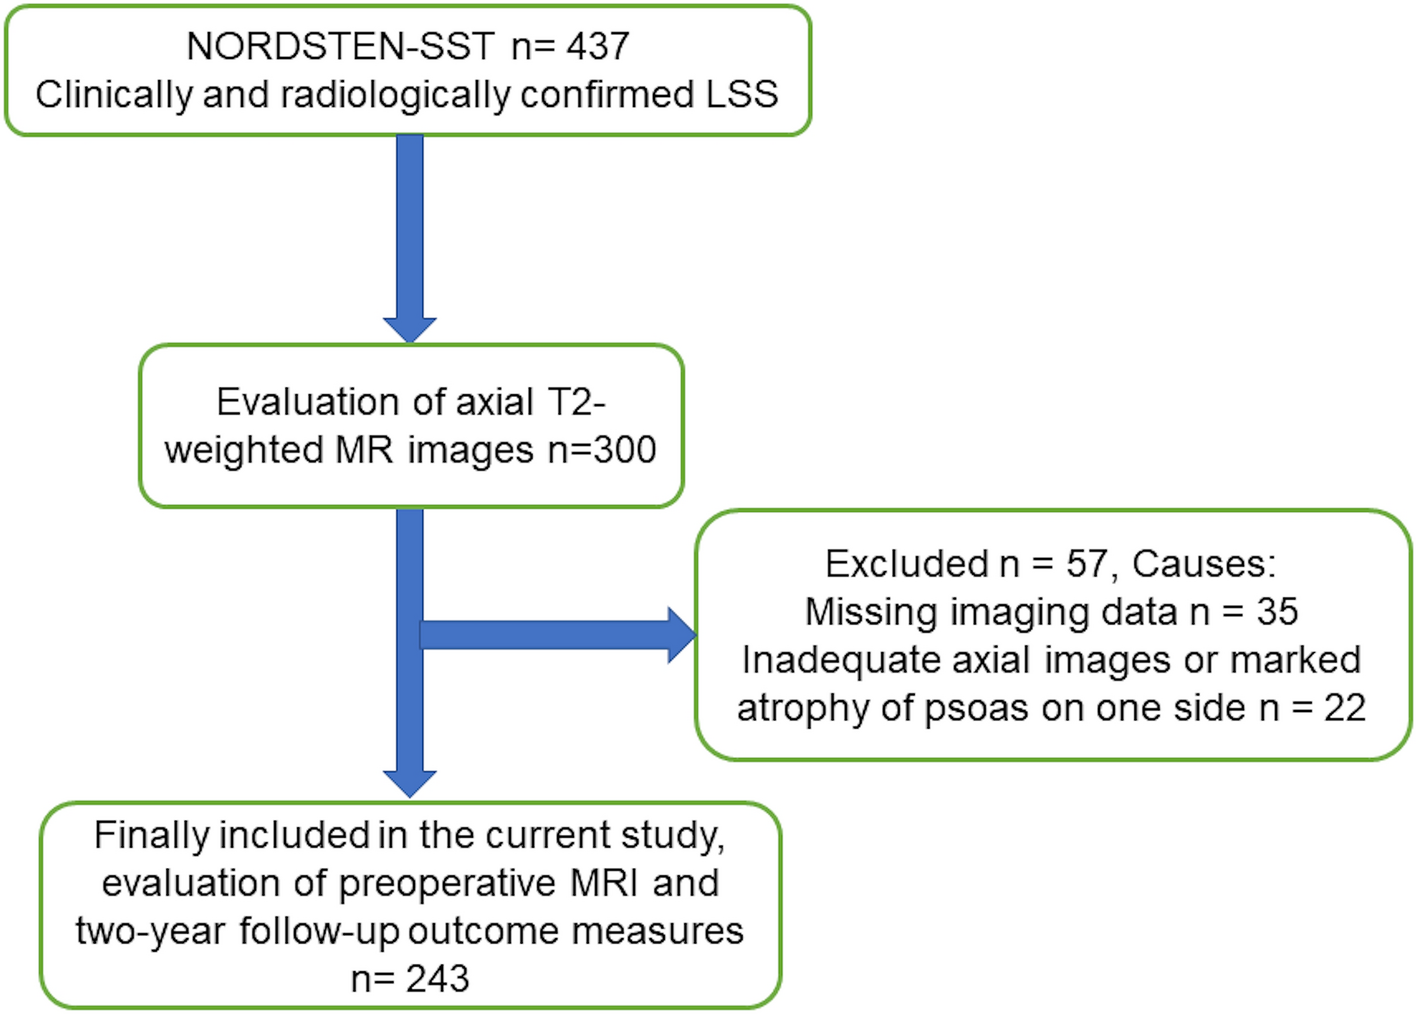 Preoperative fatty infiltration of paraspinal muscles assessed by MRI is associated with less improvement of leg pain 2 years after surgery for lumbar spinal stenosis